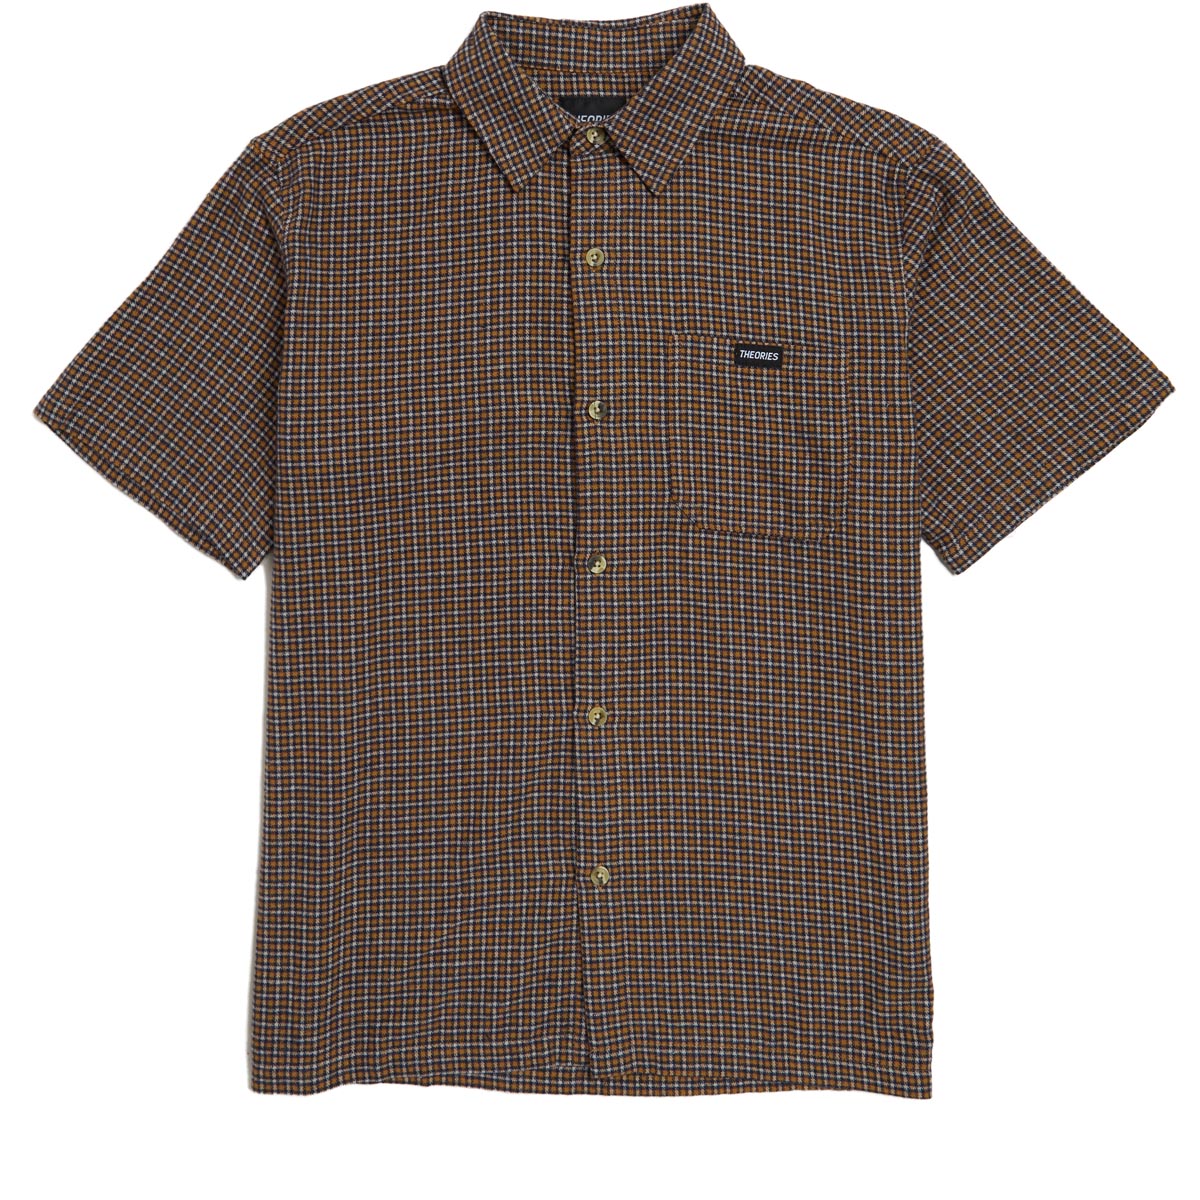 Theories Avignon Flannel Button-Up Shirt - Apricot image 1